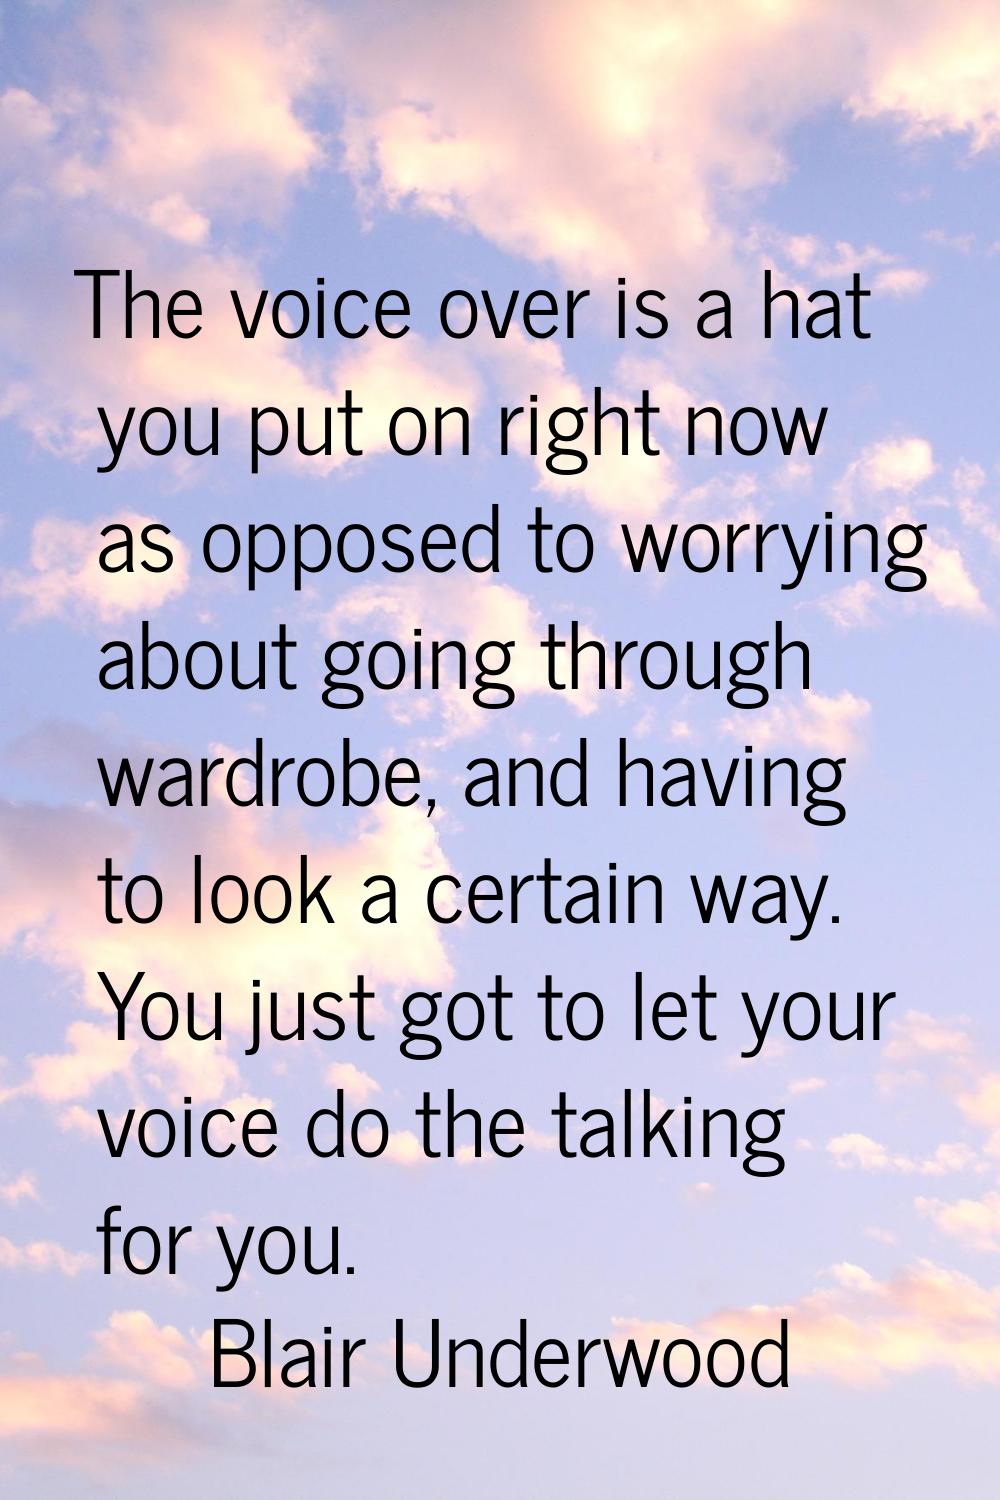 The voice over is a hat you put on right now as opposed to worrying about going through wardrobe, a